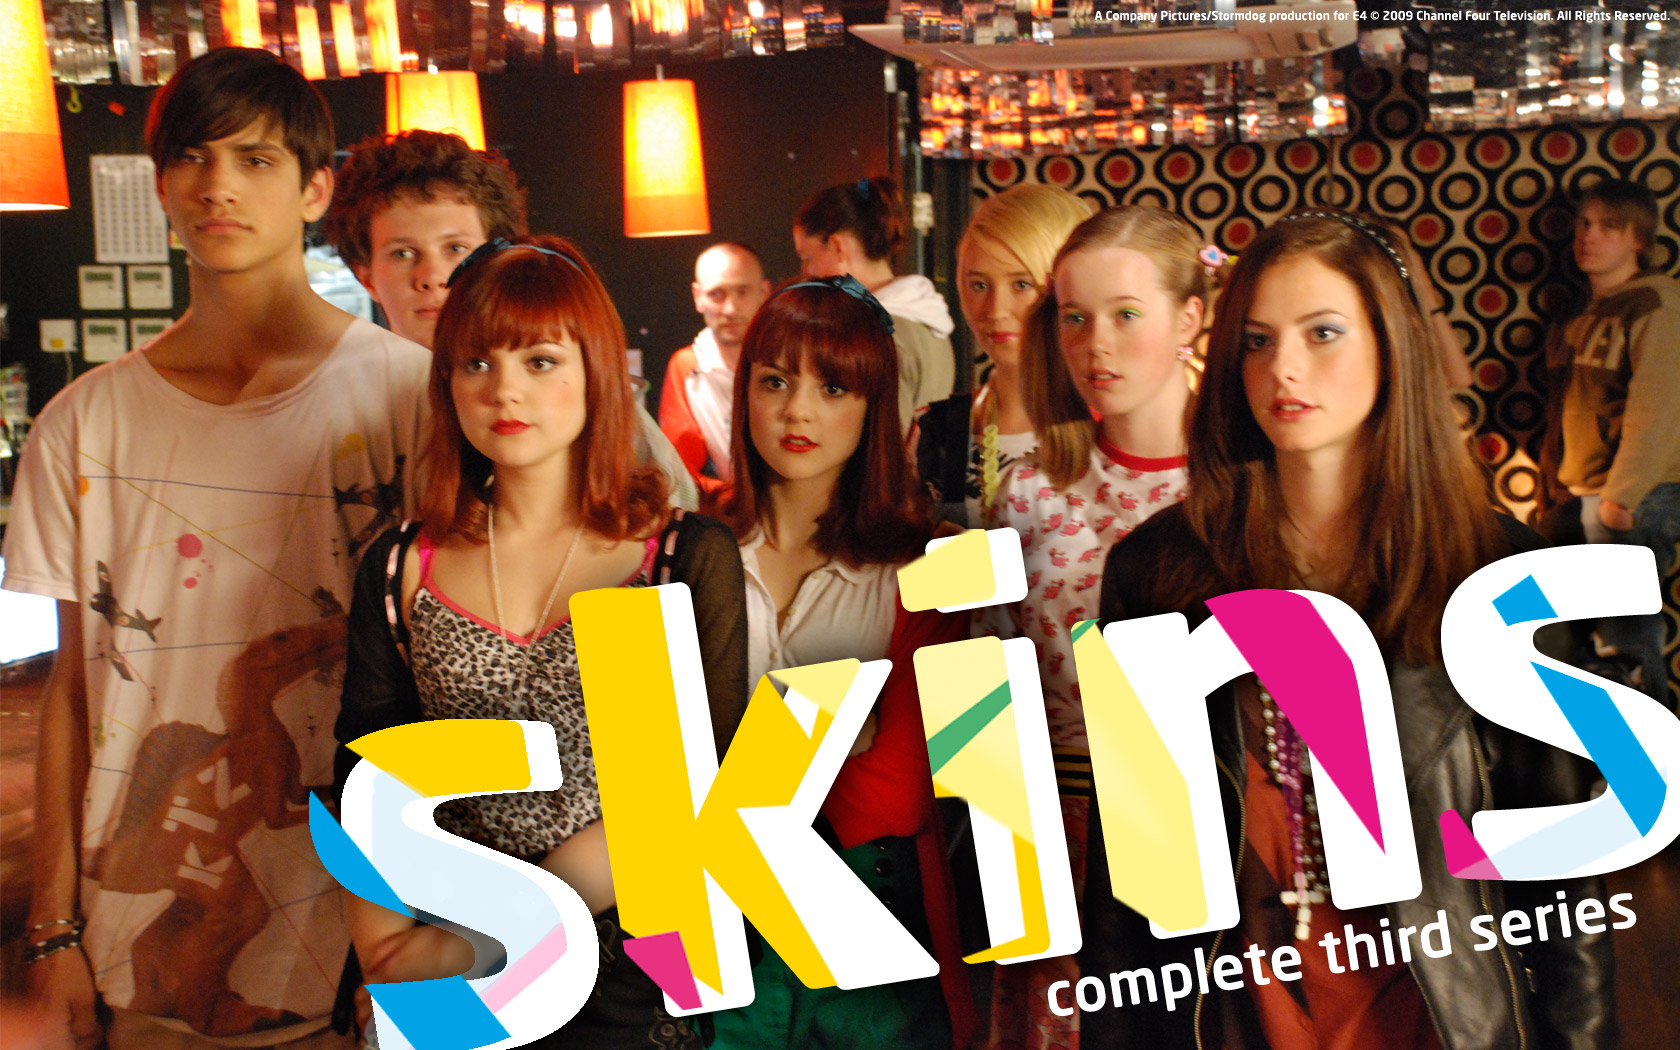 Skins Wallpapers Tv Show Hq Skins Pictures 4k